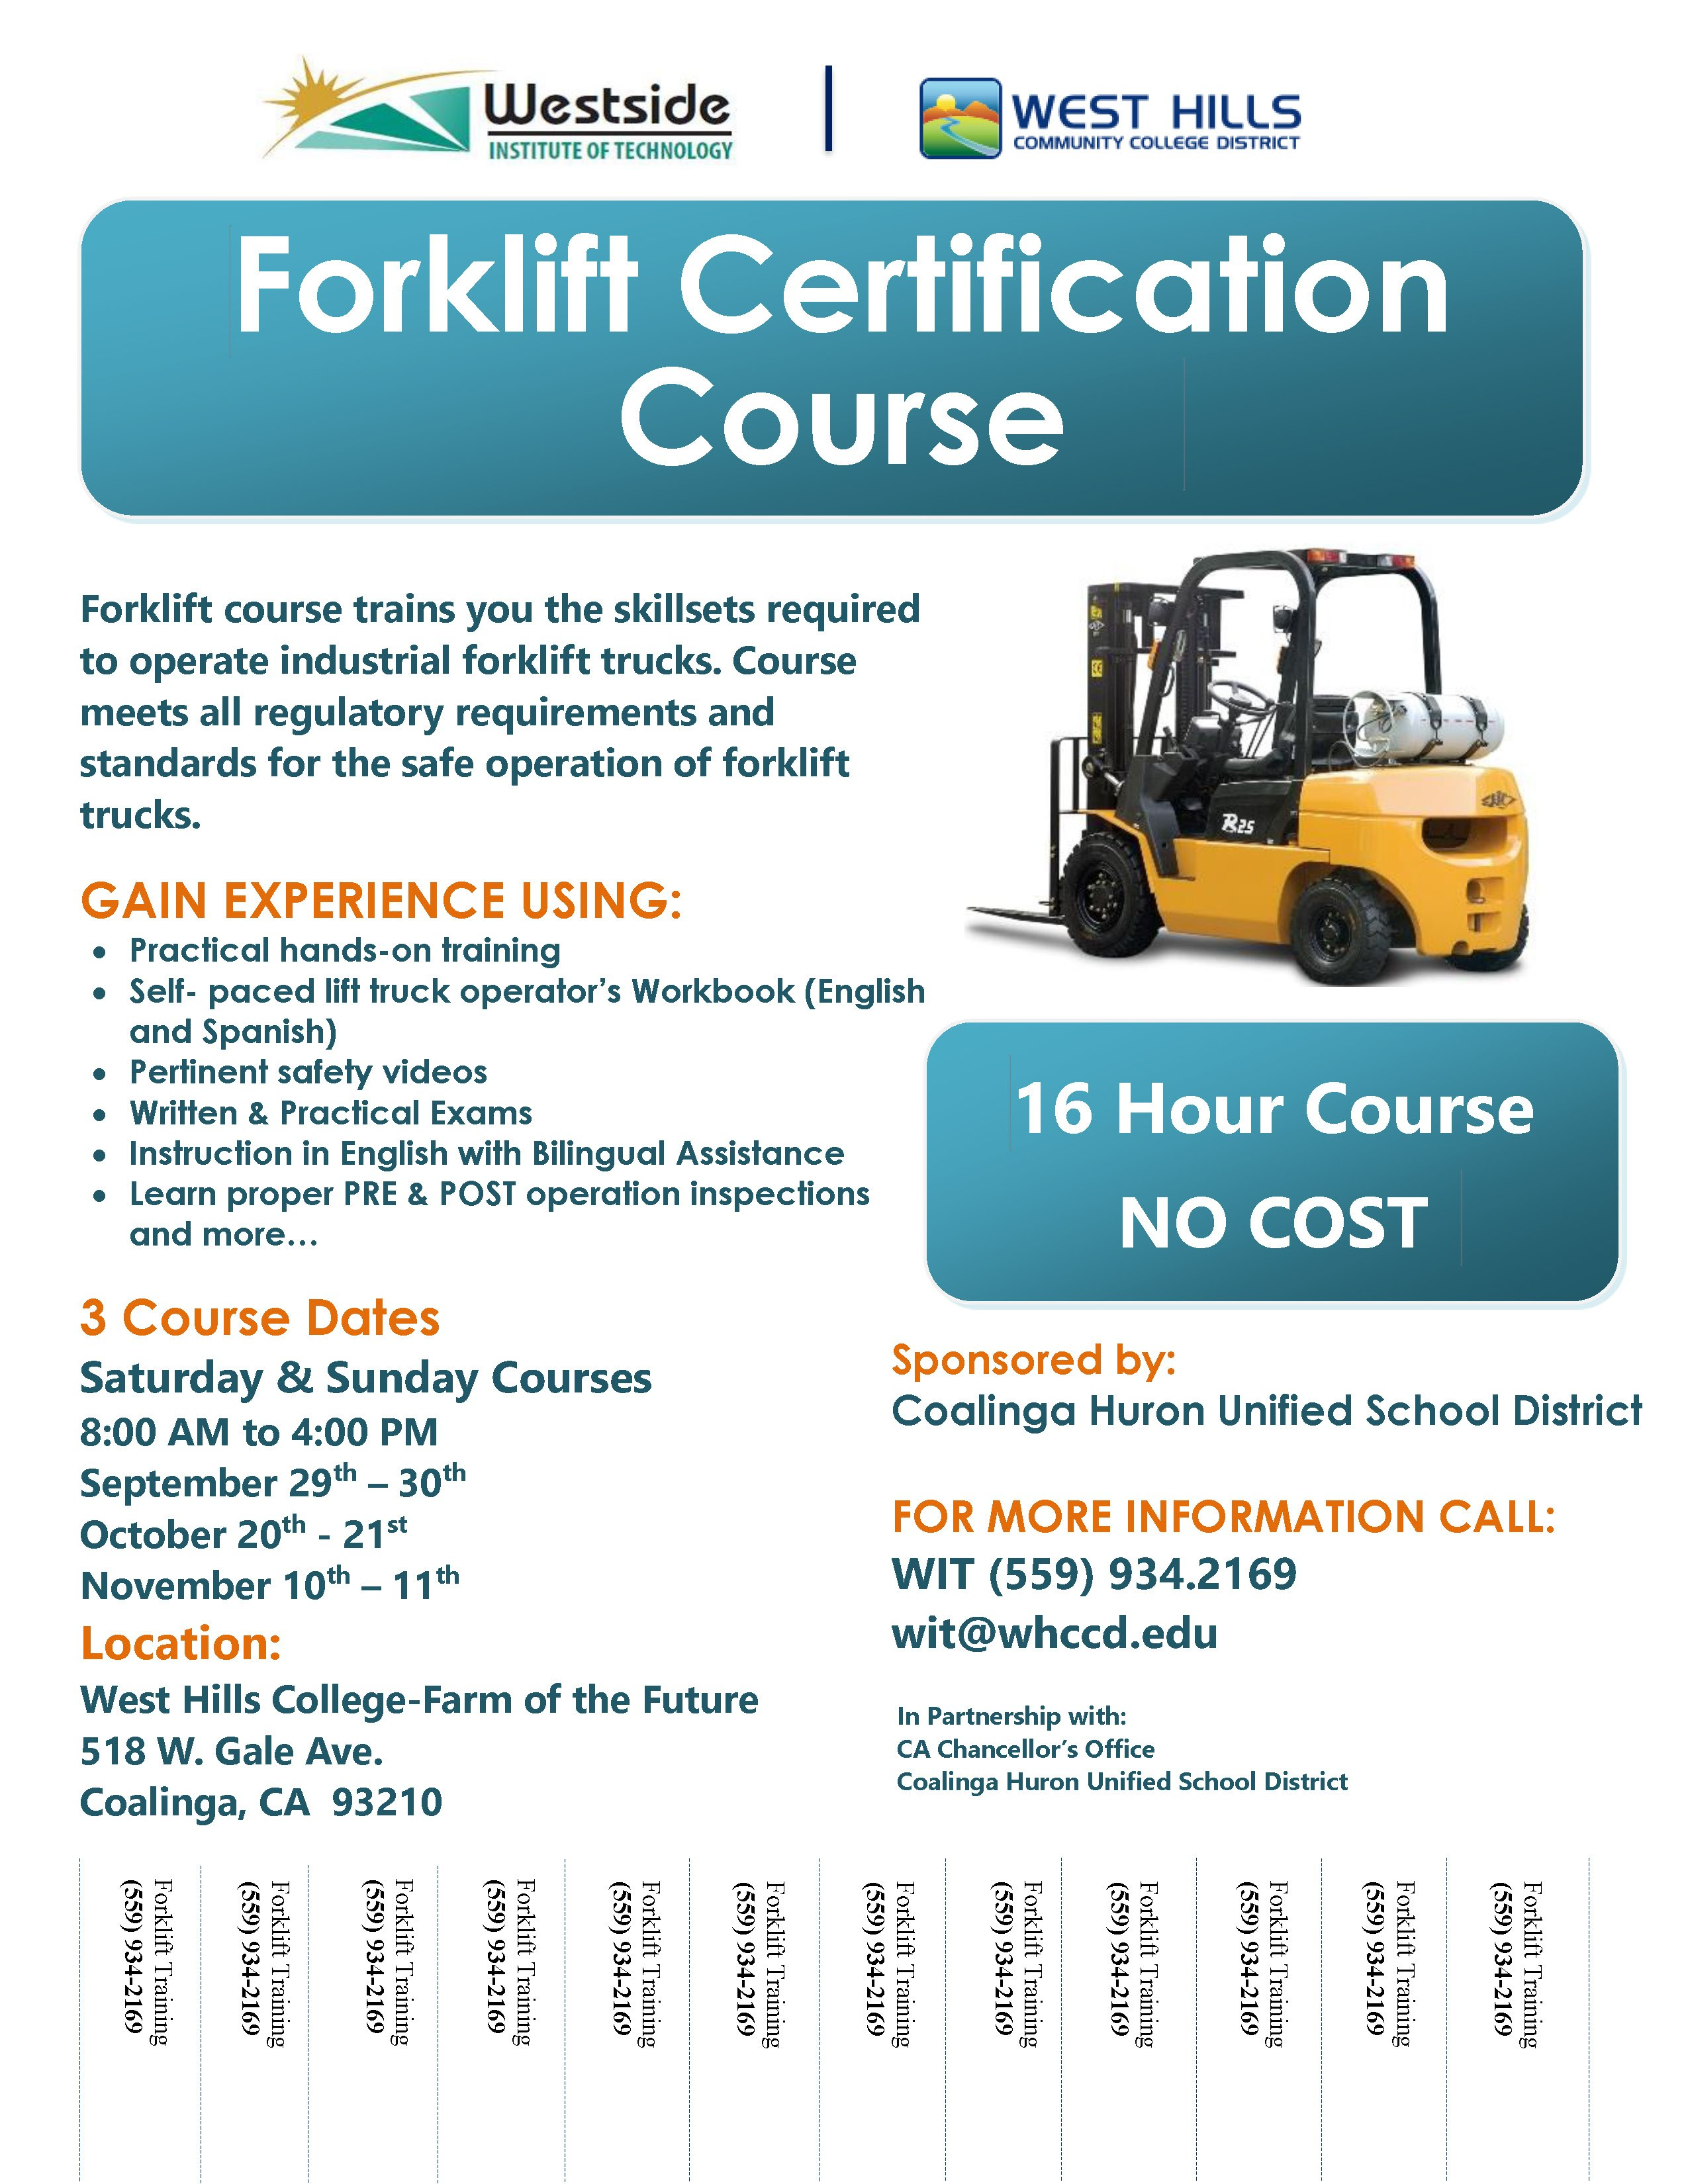 Card Copy Beautiful Free Forklift Certification  Katieroseintimates inside Forklift Certification Card Template